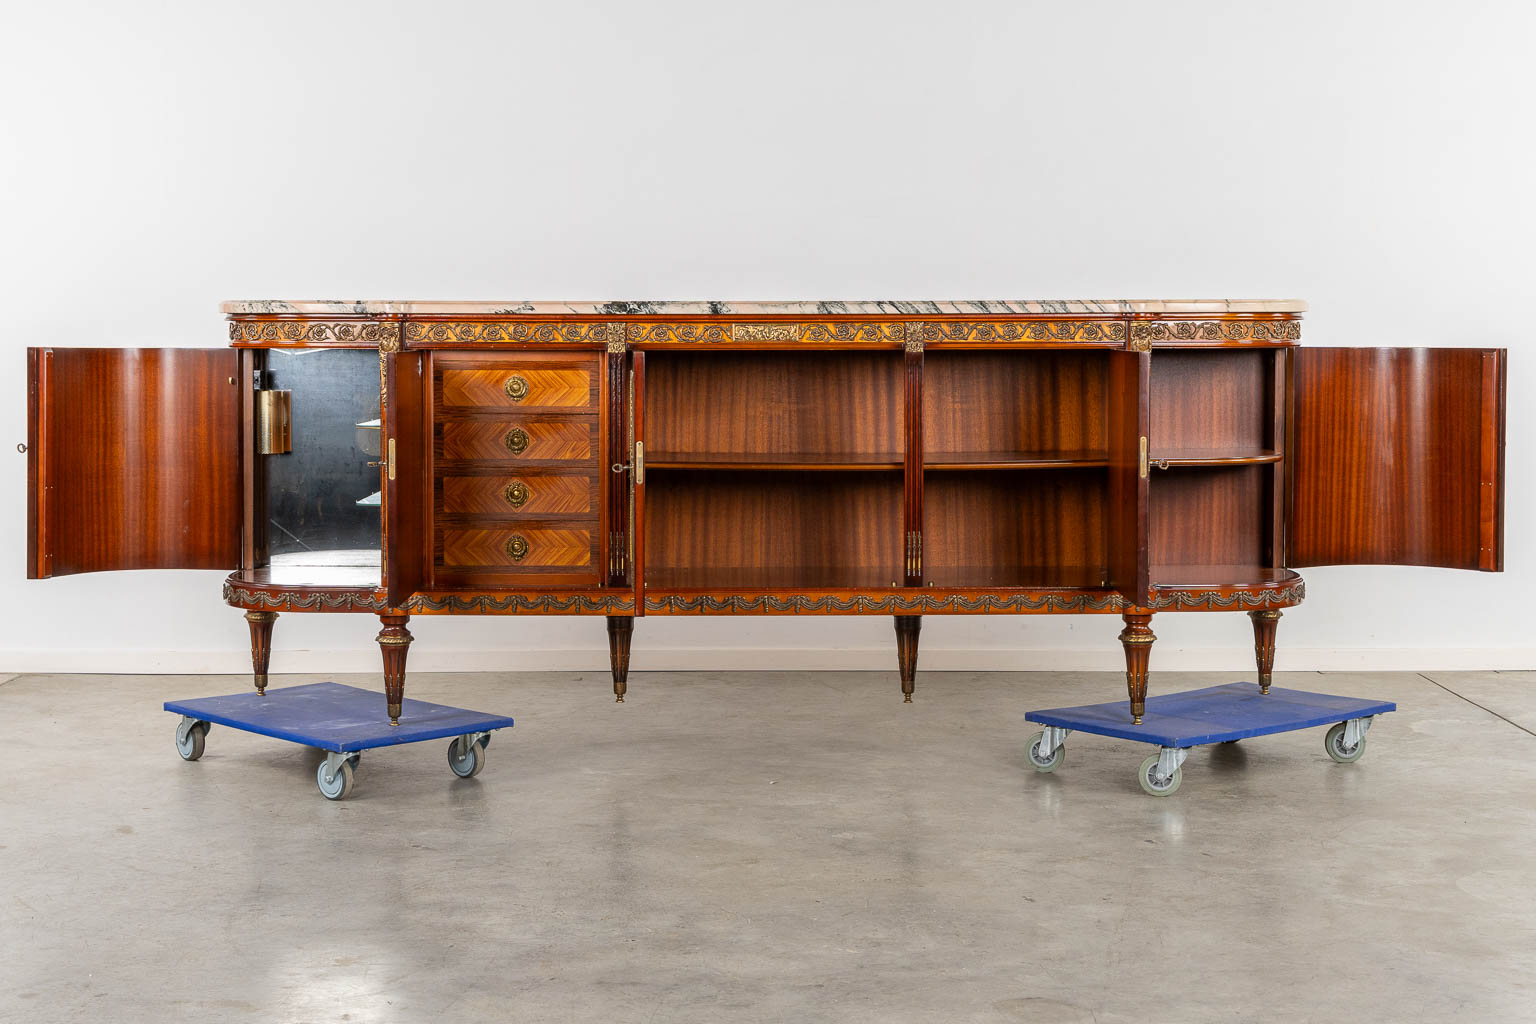 Ehalt, a 9-piece dining room set, 20th C. (L:58 x W:265 x H:100 cm) - Image 9 of 13